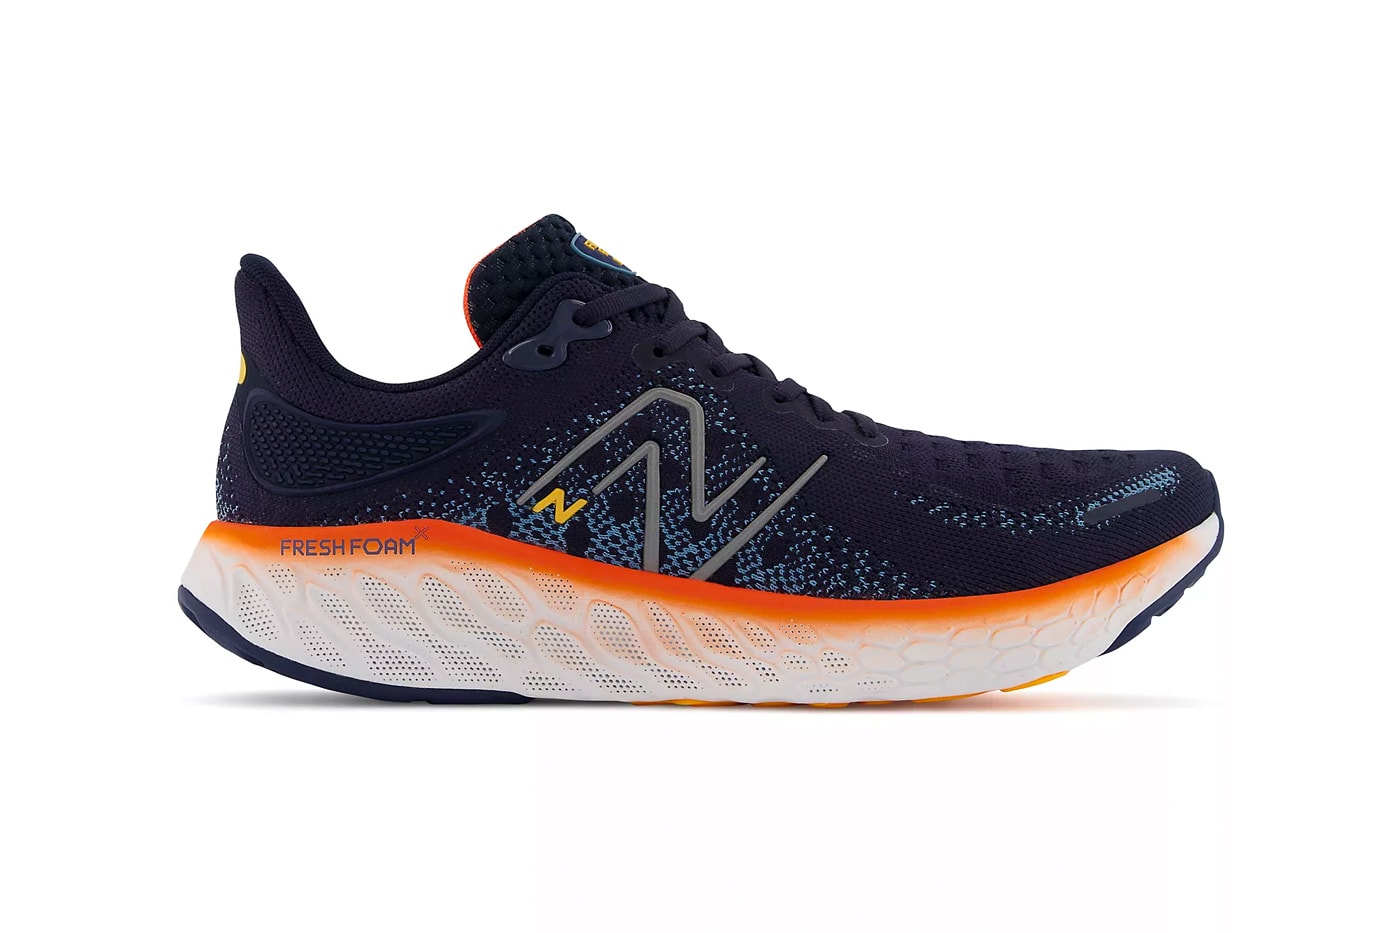 New Balance Fresh Foam X 1080v12 Best Running Shoes Right Now to Buy 2023